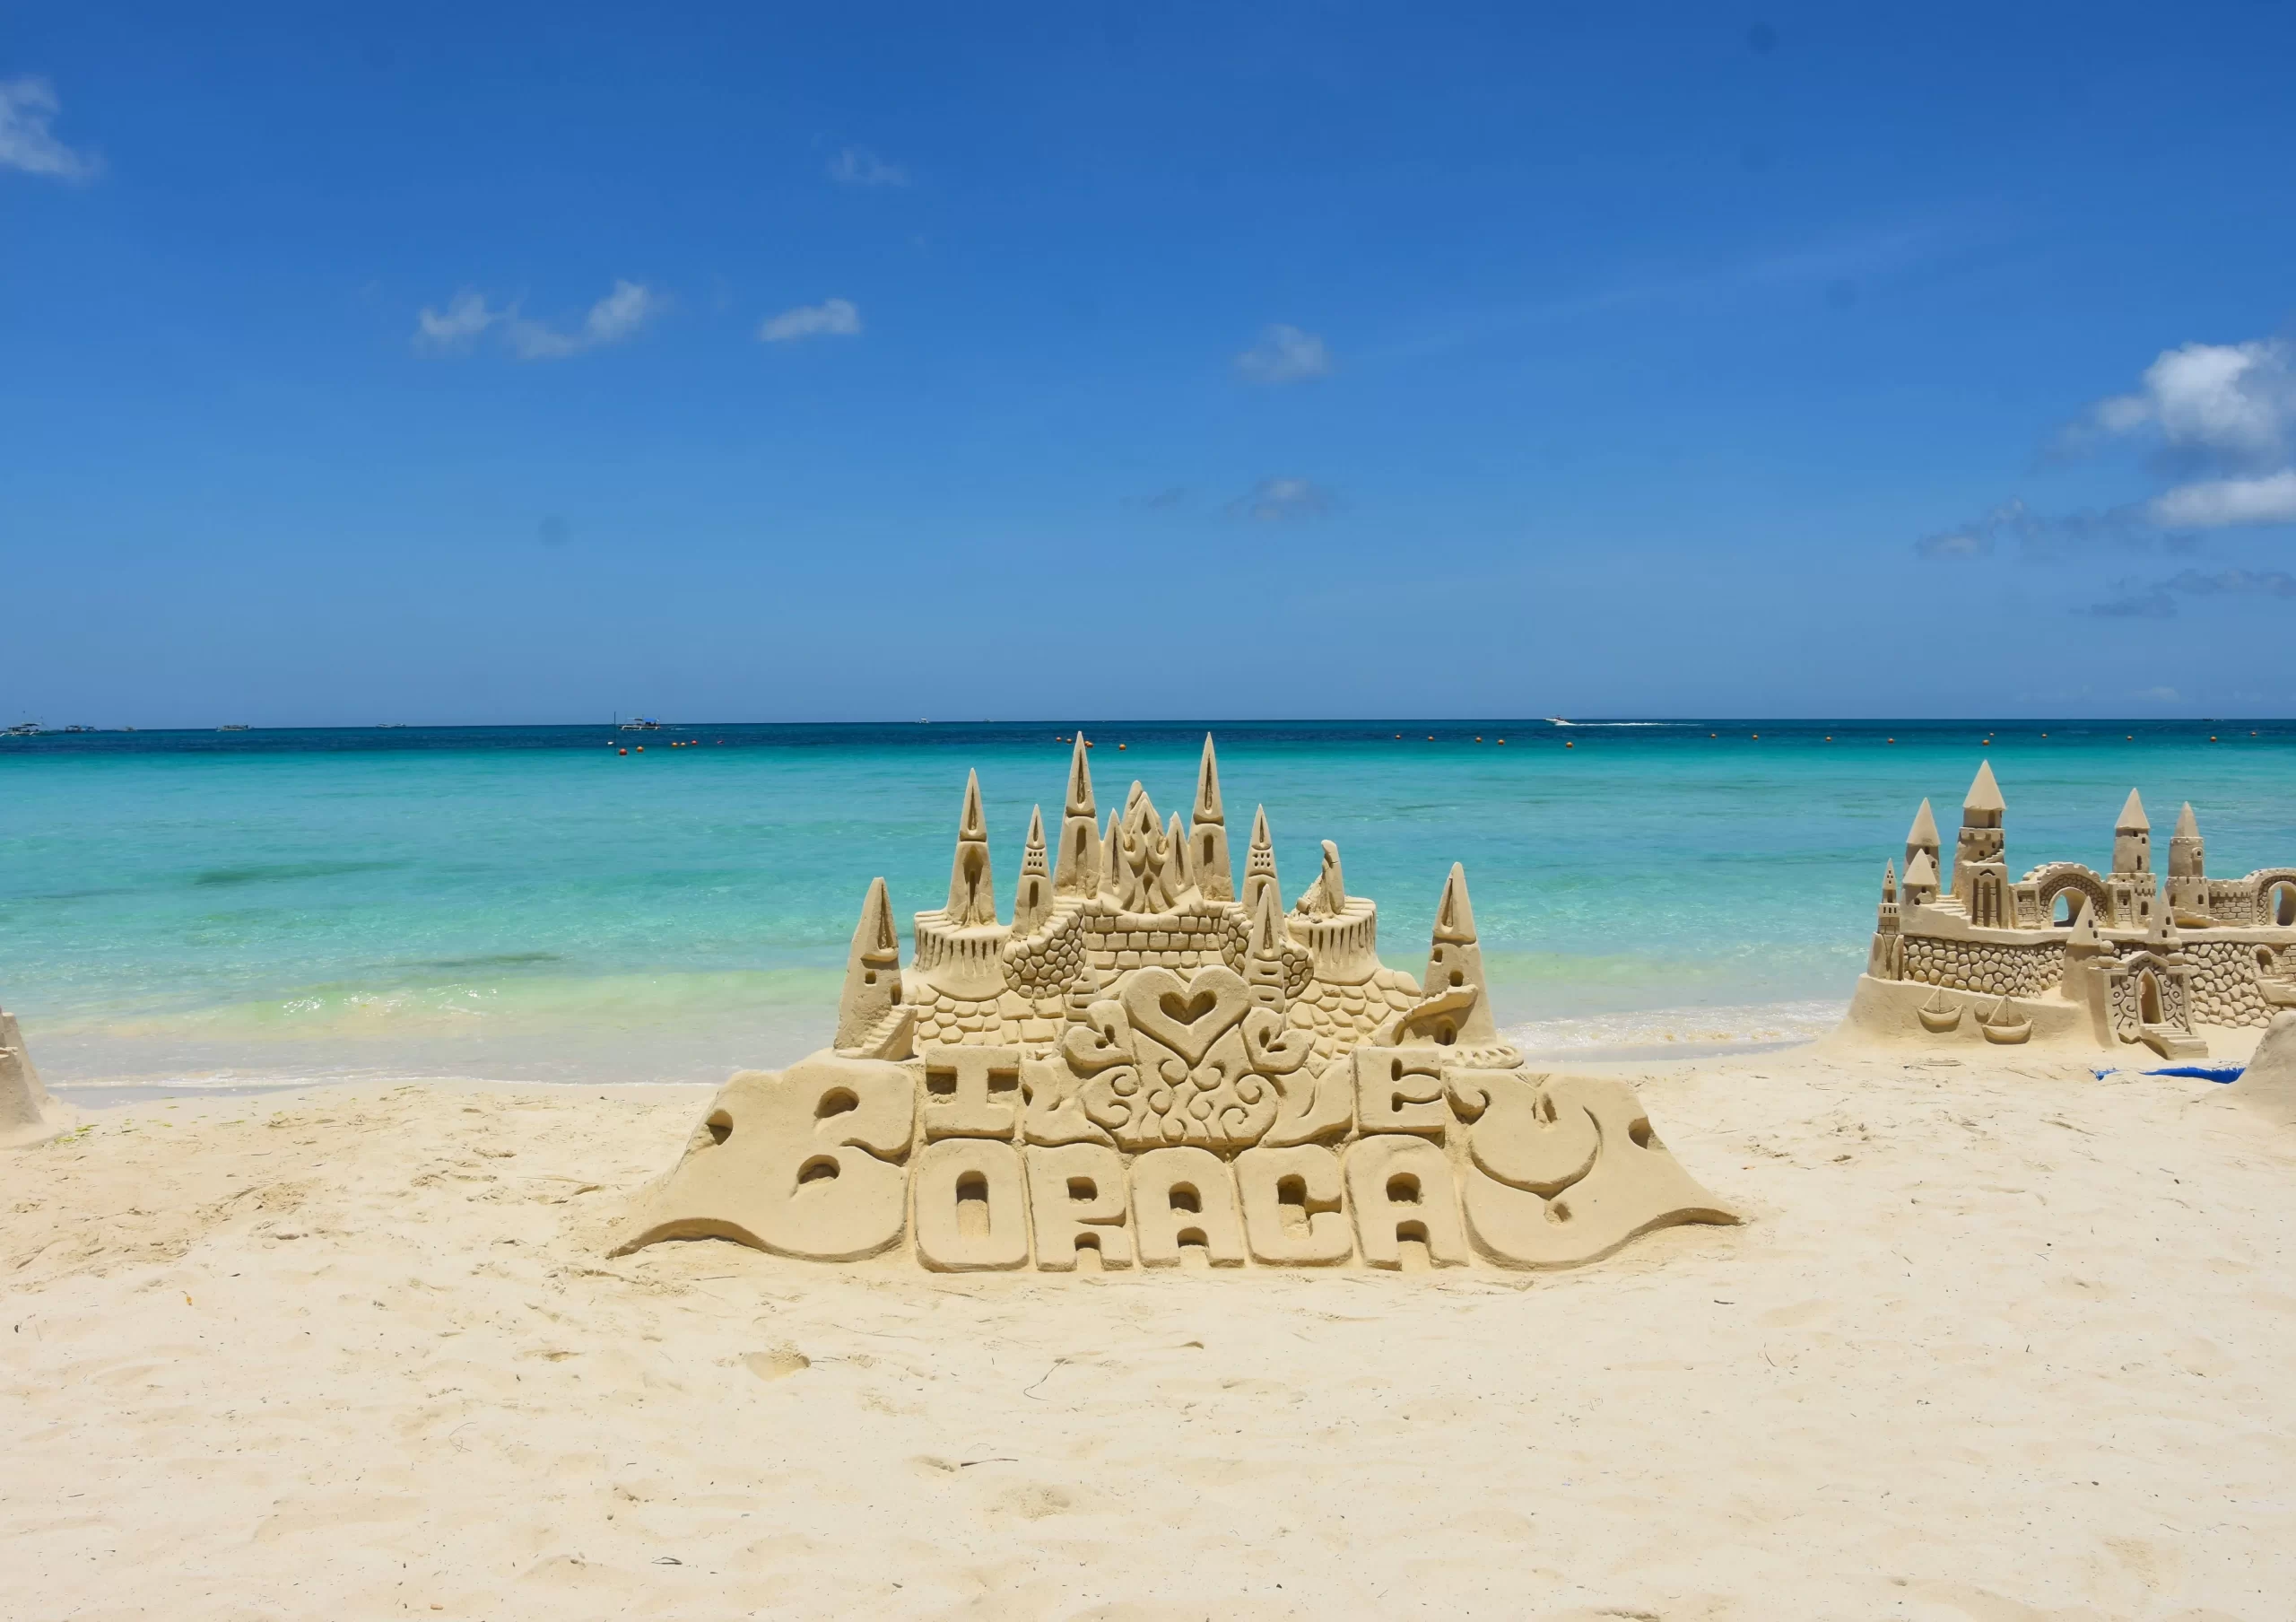 Sand Castle competition for Love Boracay